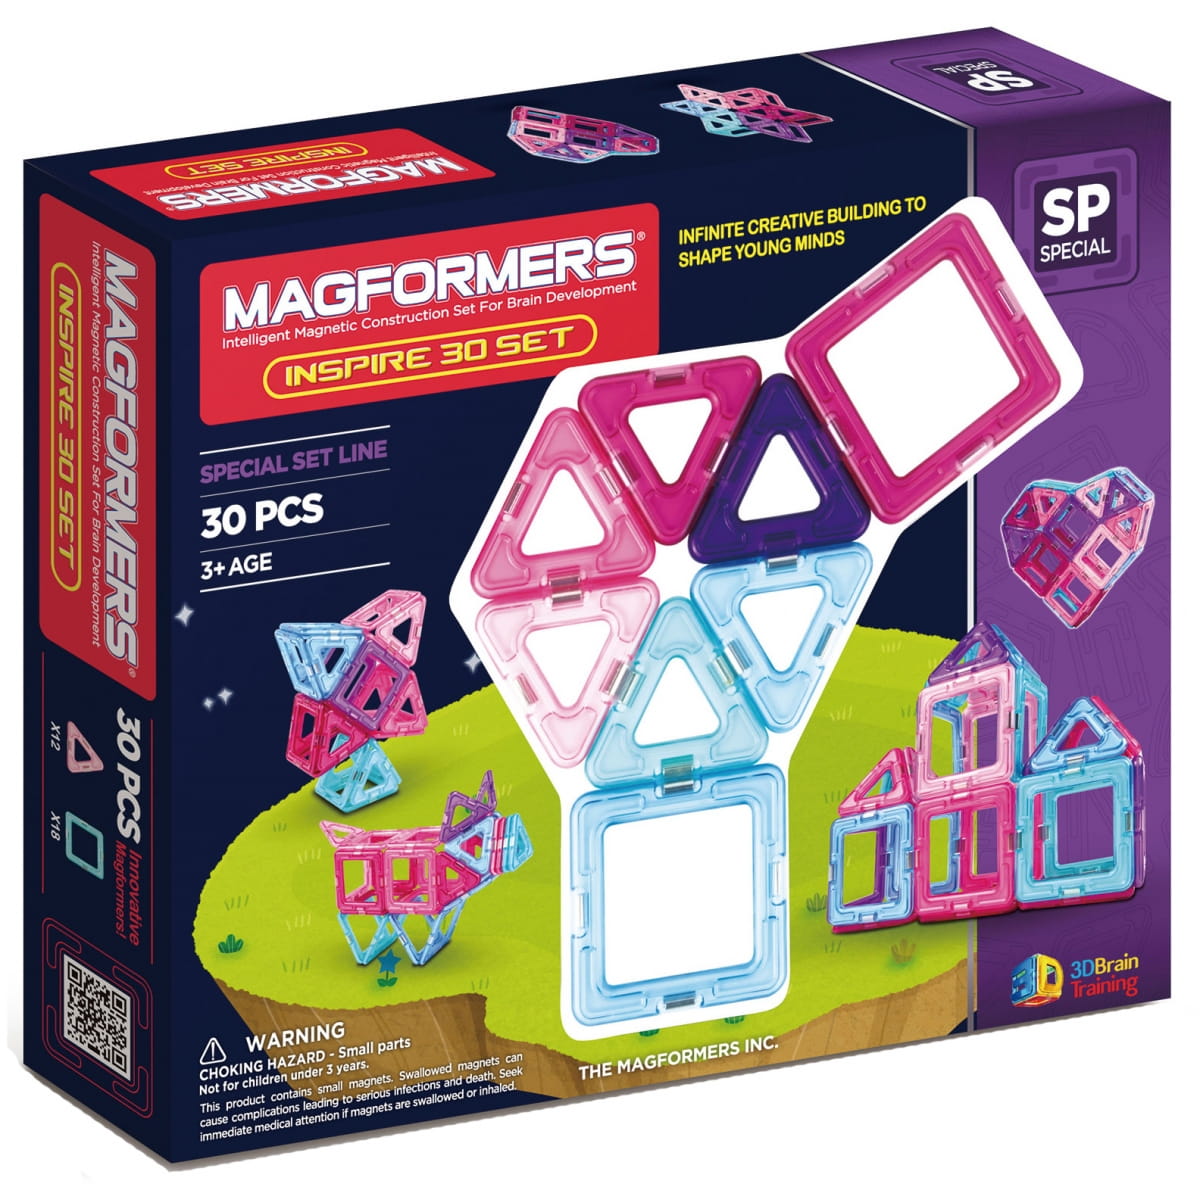    Magformers Inspire 30 set